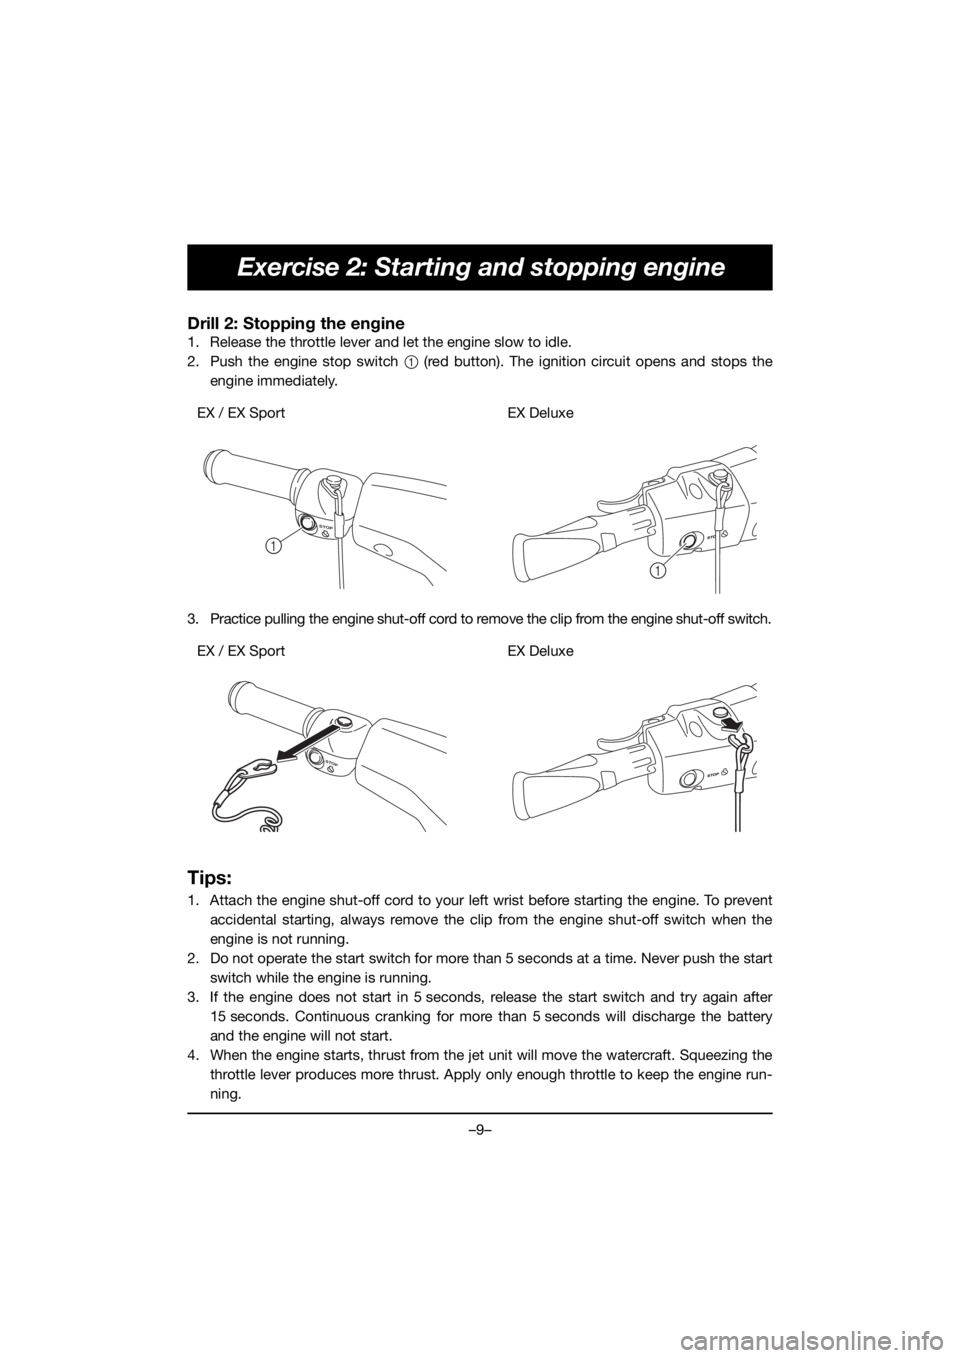 YAMAHA EX 2020  Bruksanvisningar (in Swedish) –9–
Exercise 2: Starting and stopping engine
Drill 2: Stopping the engine
1. Release the throttle lever and let the engine slow to idle.
2. Push the engine stop switch 1 (red button). The ignition